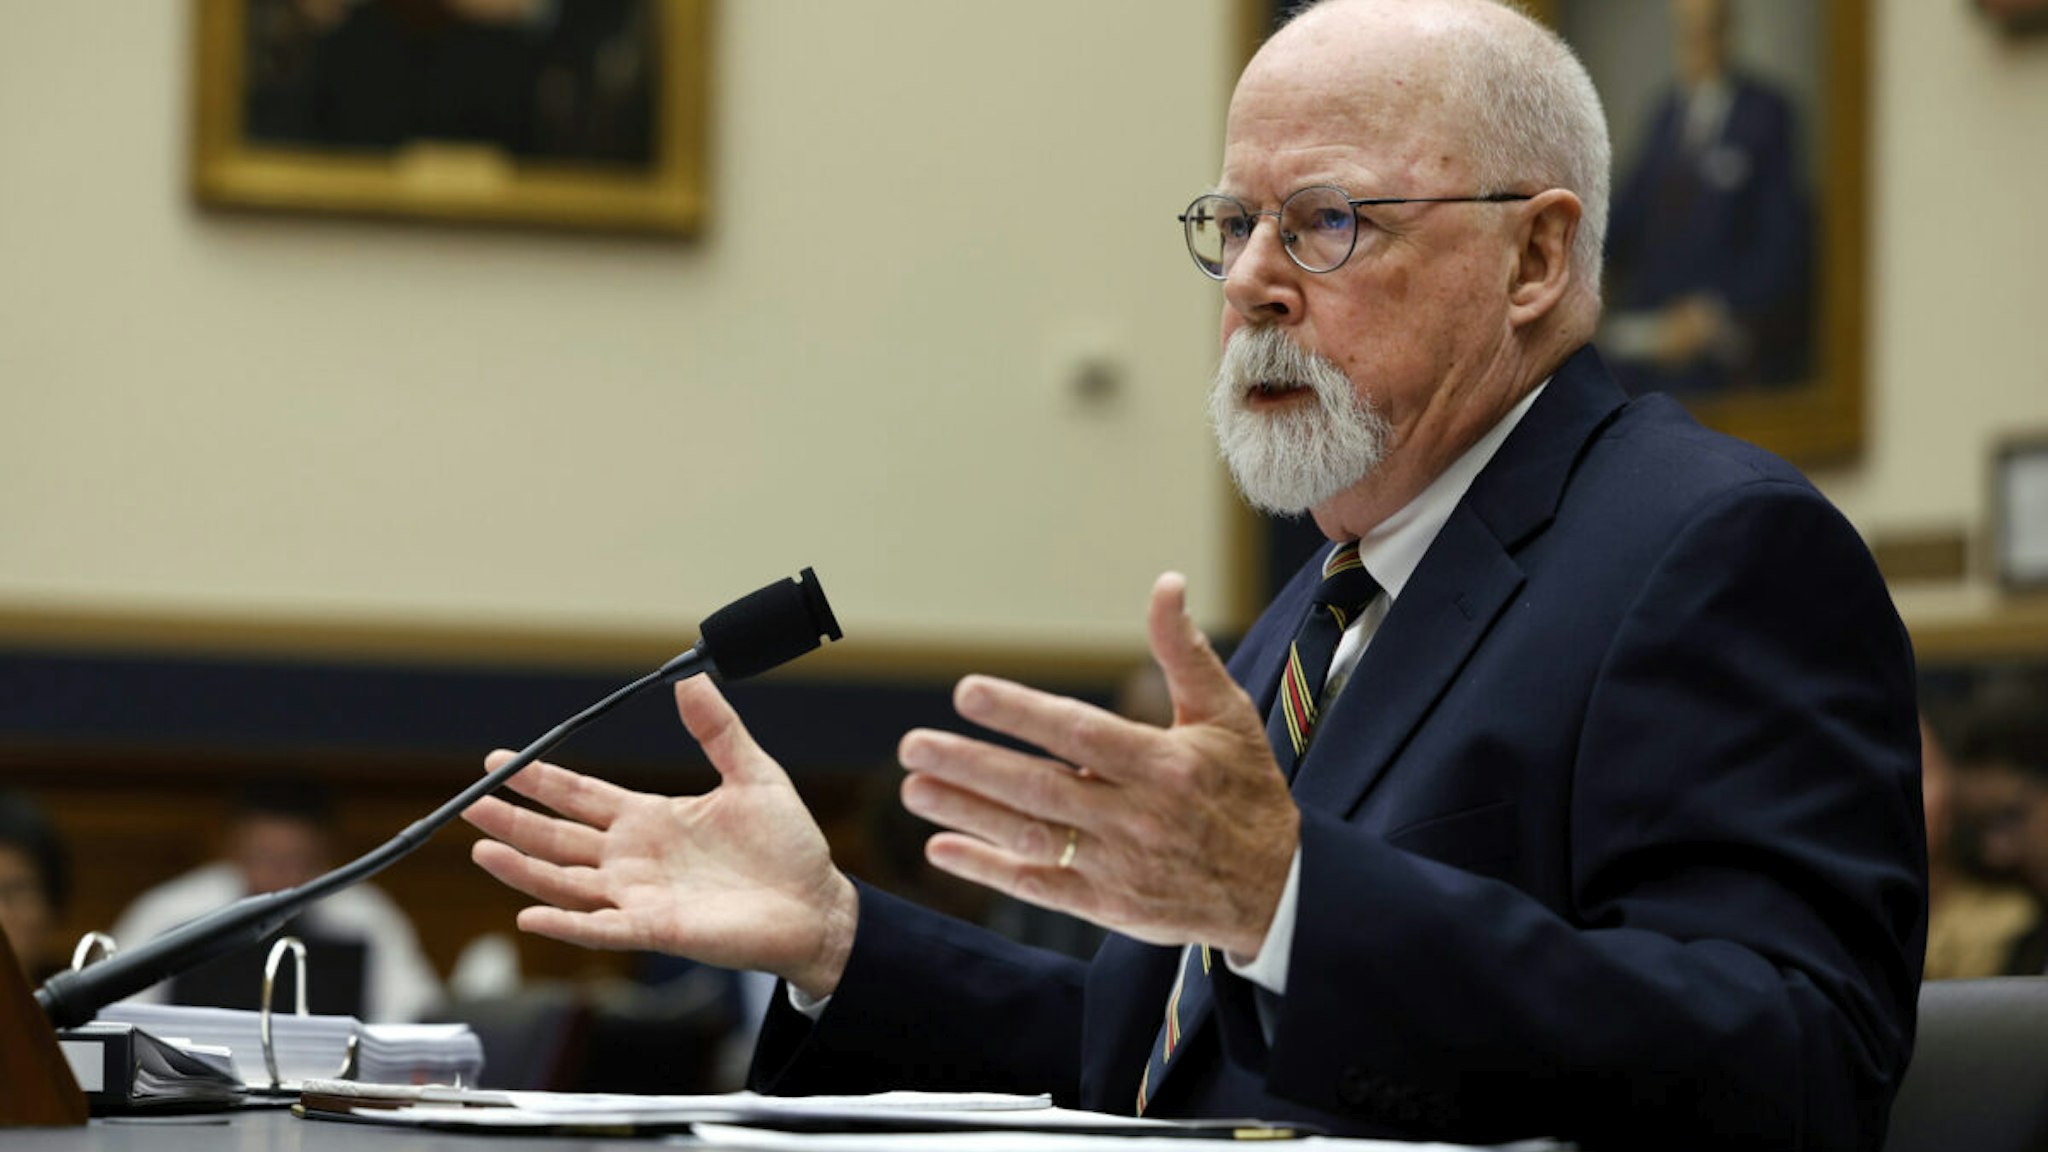 Special Counsel John Durham testifies before the House Judiciary Committee in the Rayburn House Office Building on June 21, 2023 in Washington, DC. Durham was tasked by former Attorney General William Barr and the Trump administration to investigate the origins of the FBI's investigation into Russian interference in the 2016 U.S. elections.